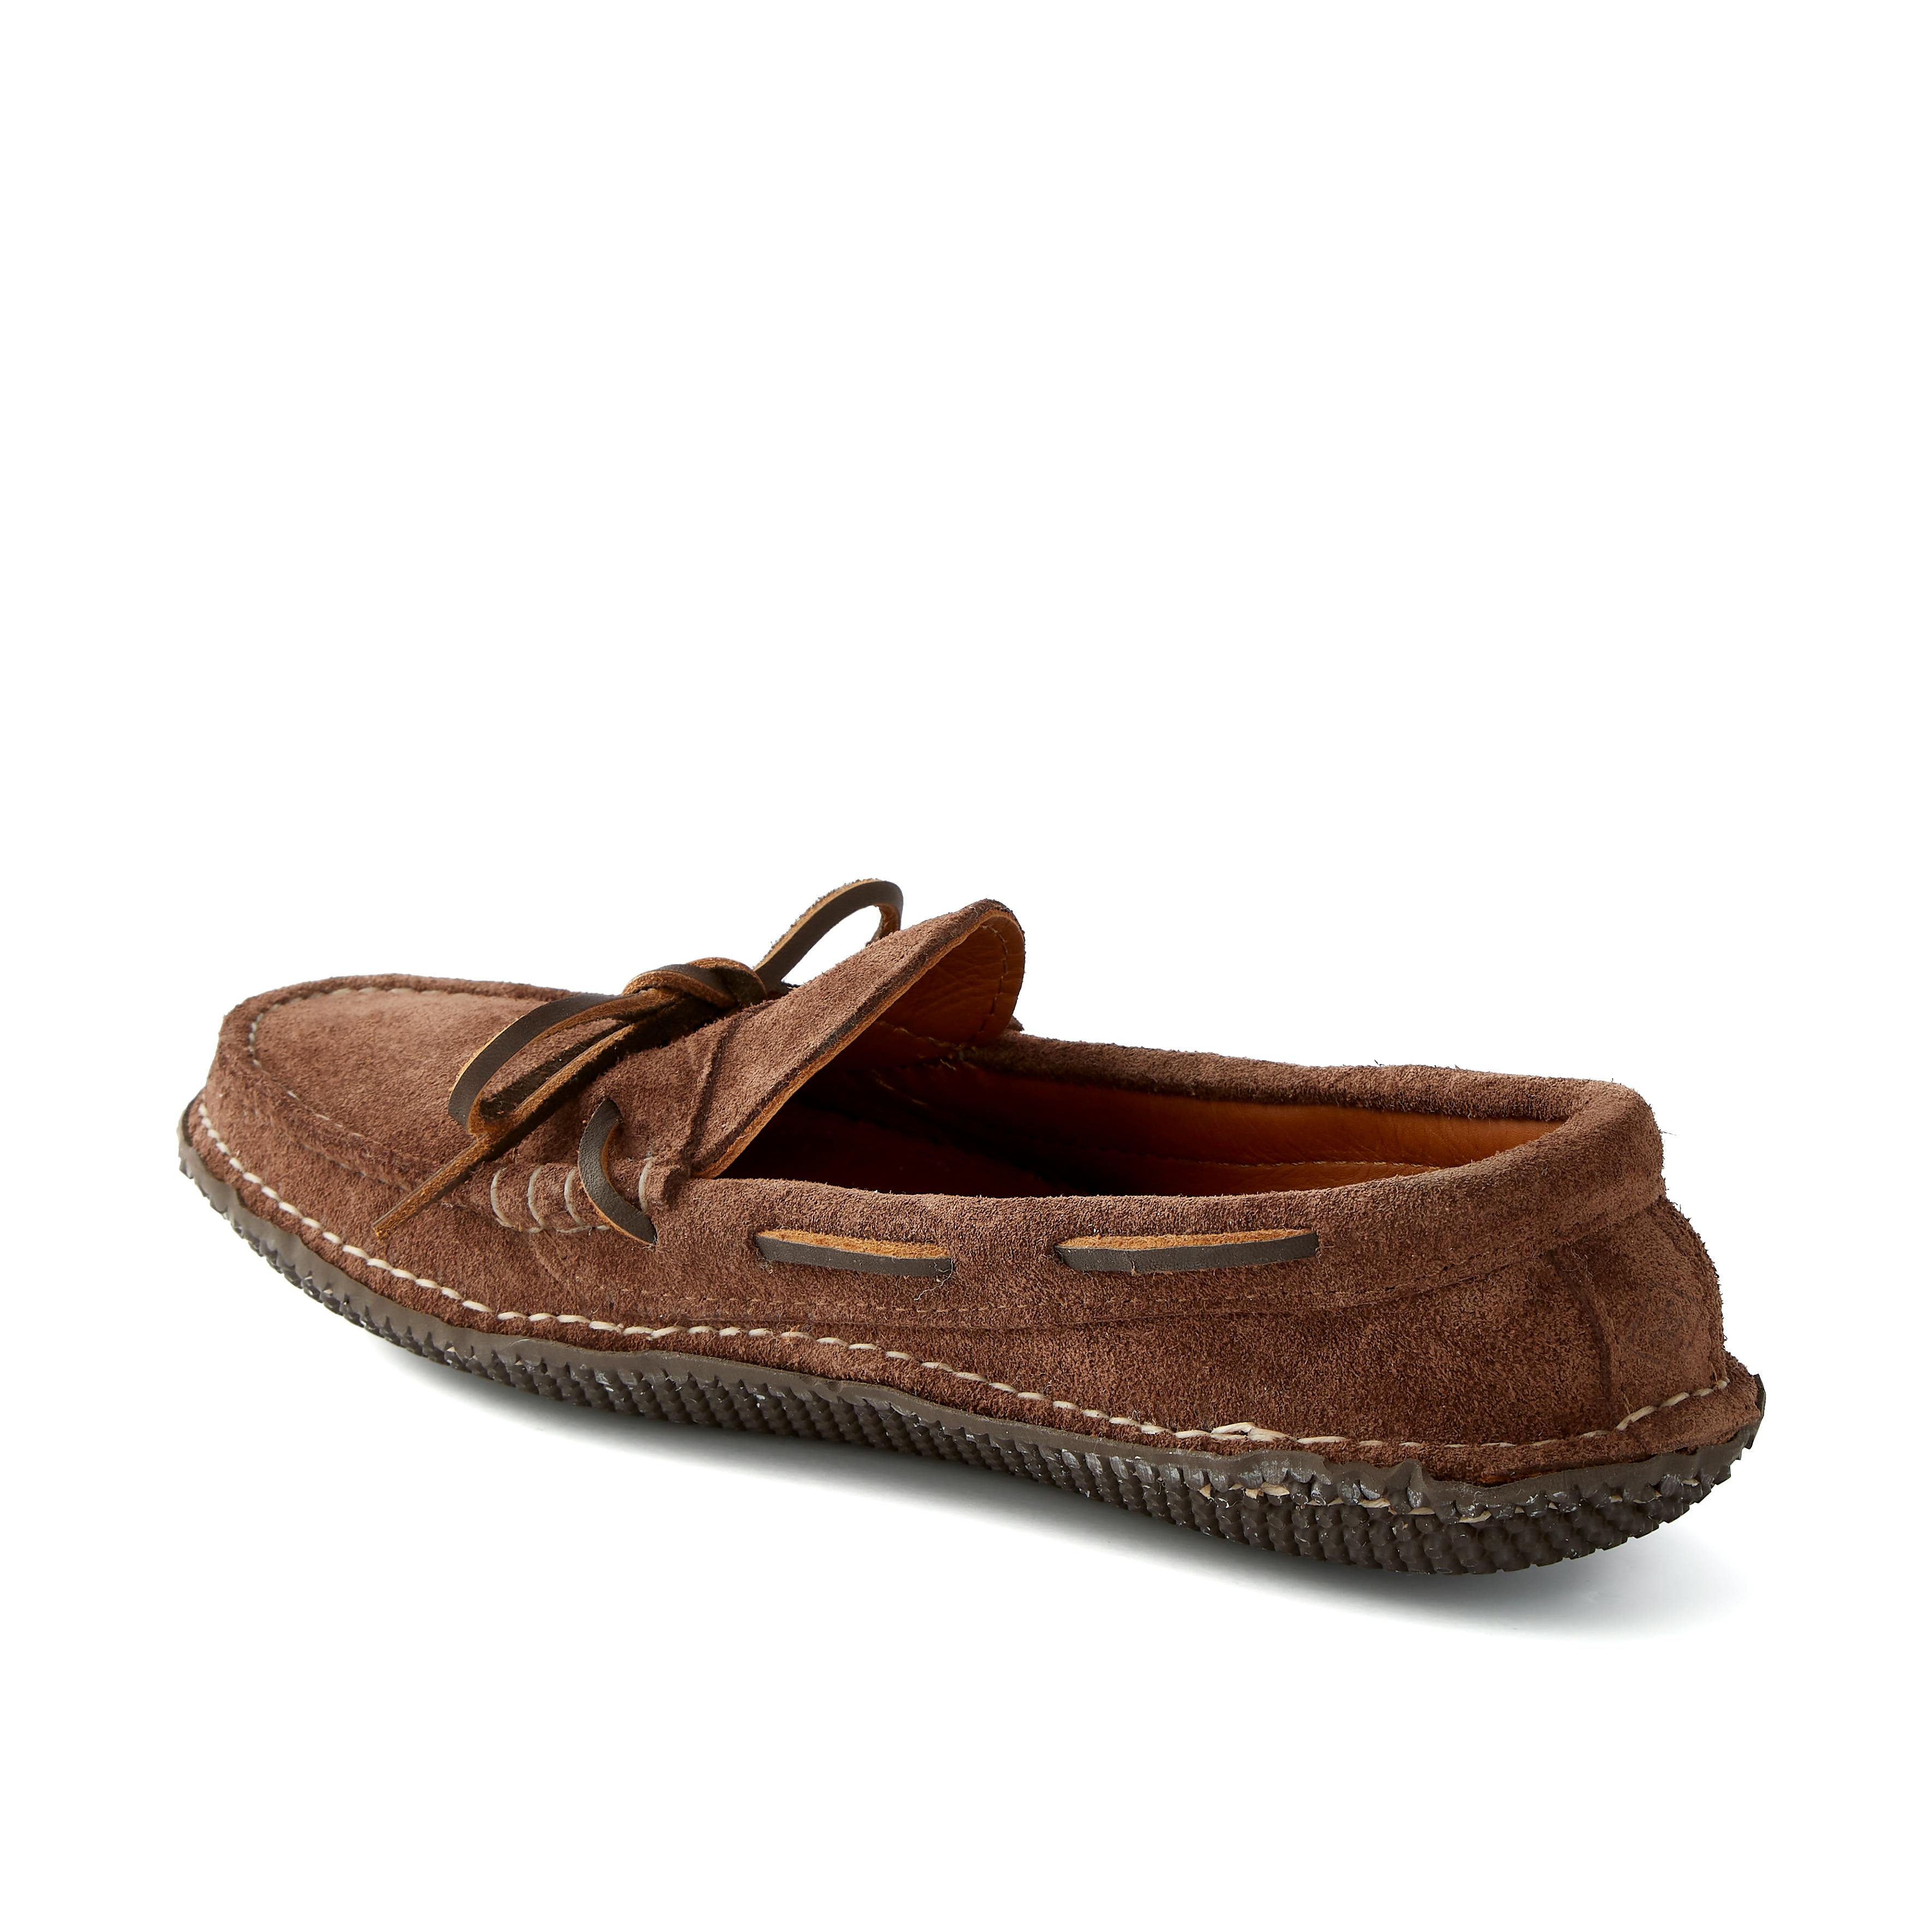 Men's Grizzly Moc: Made to Order –